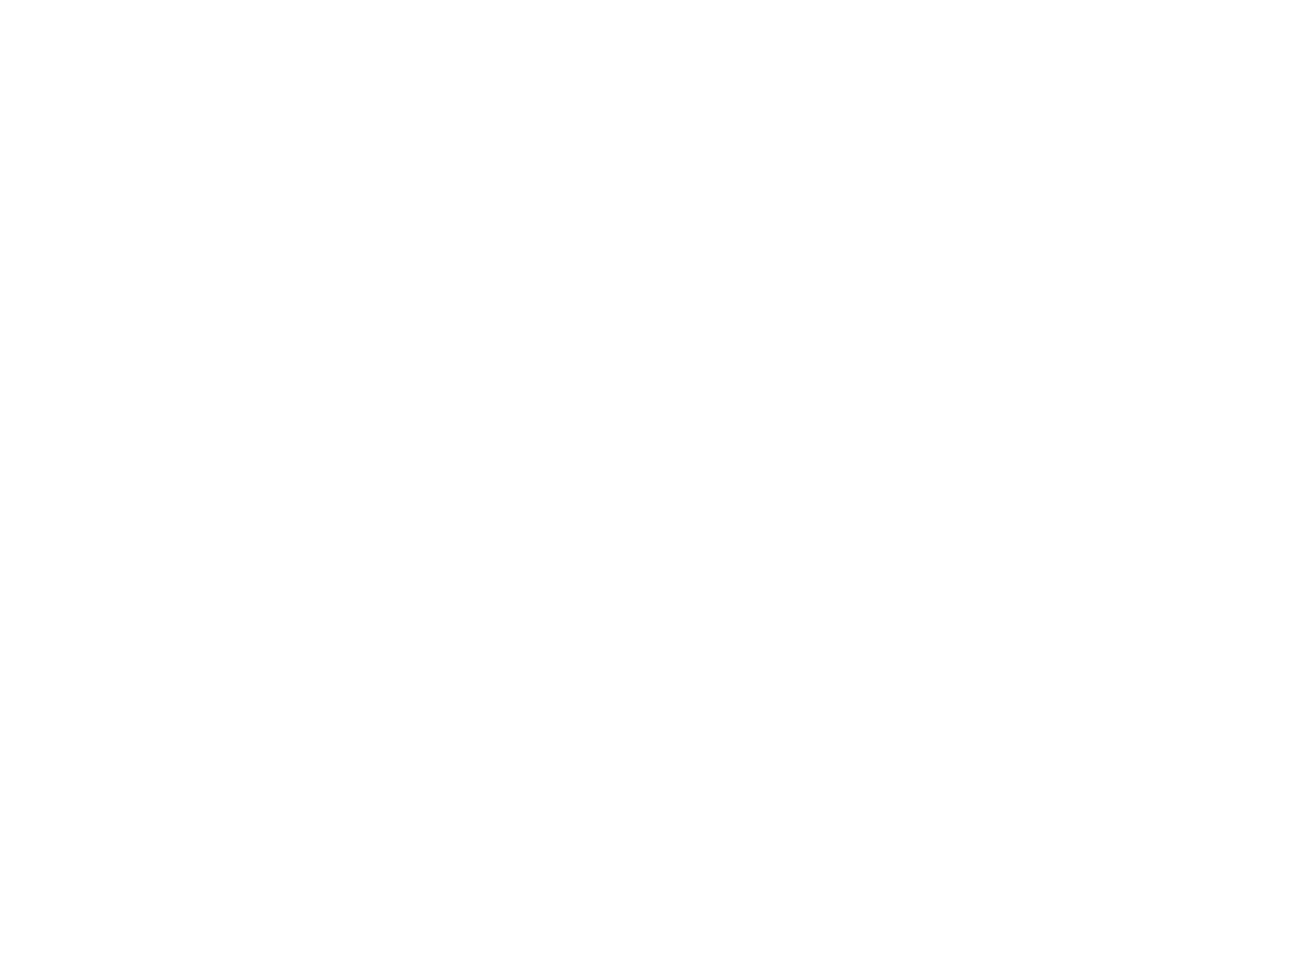 One Stop Solution